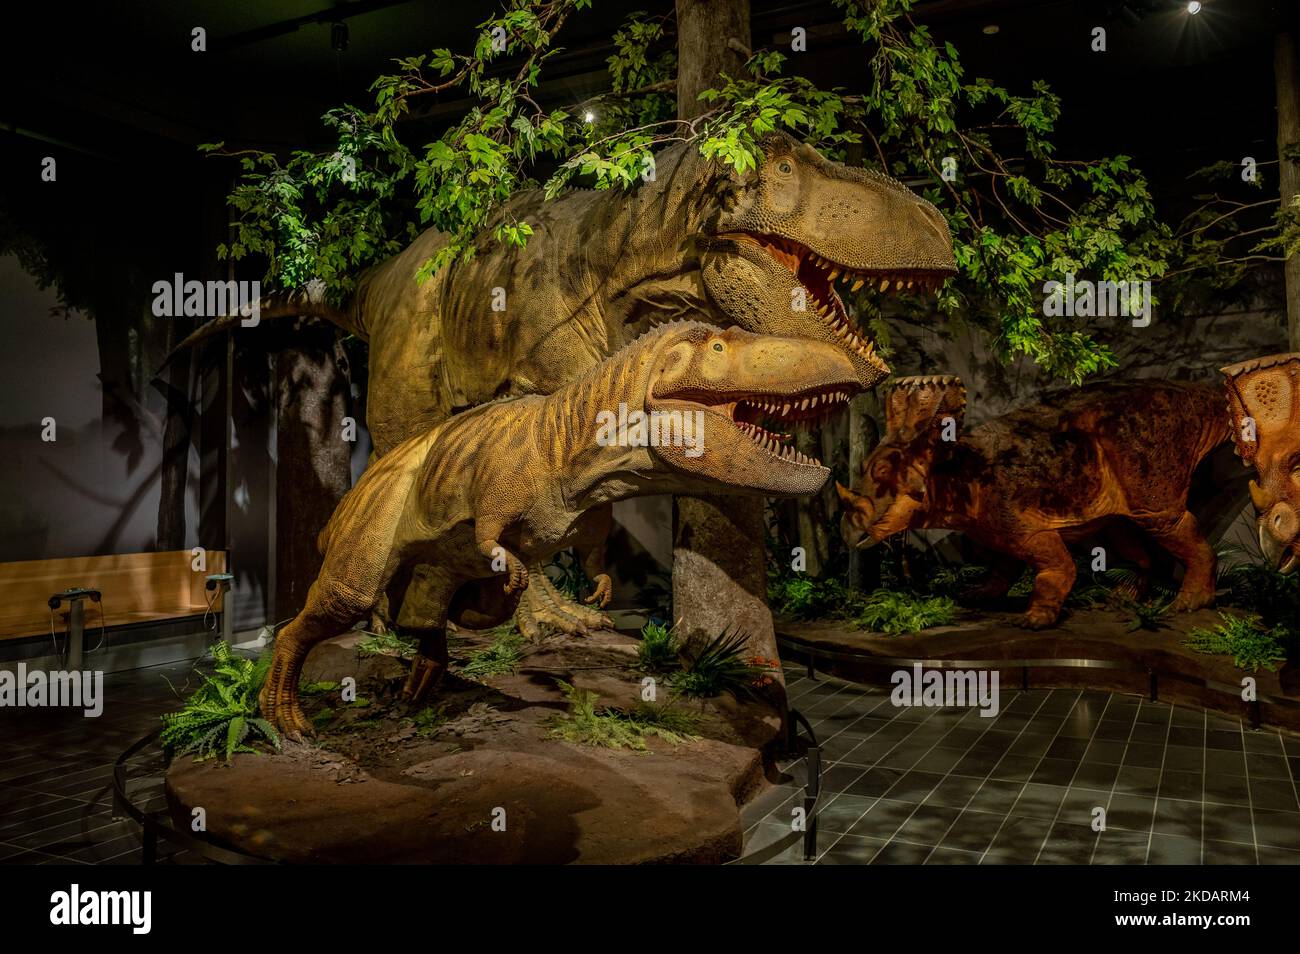 Ottawa, Ontario - October 21, 2022: Dinosaur exhibits and the Canadian Museum of Nature. Stock Photo